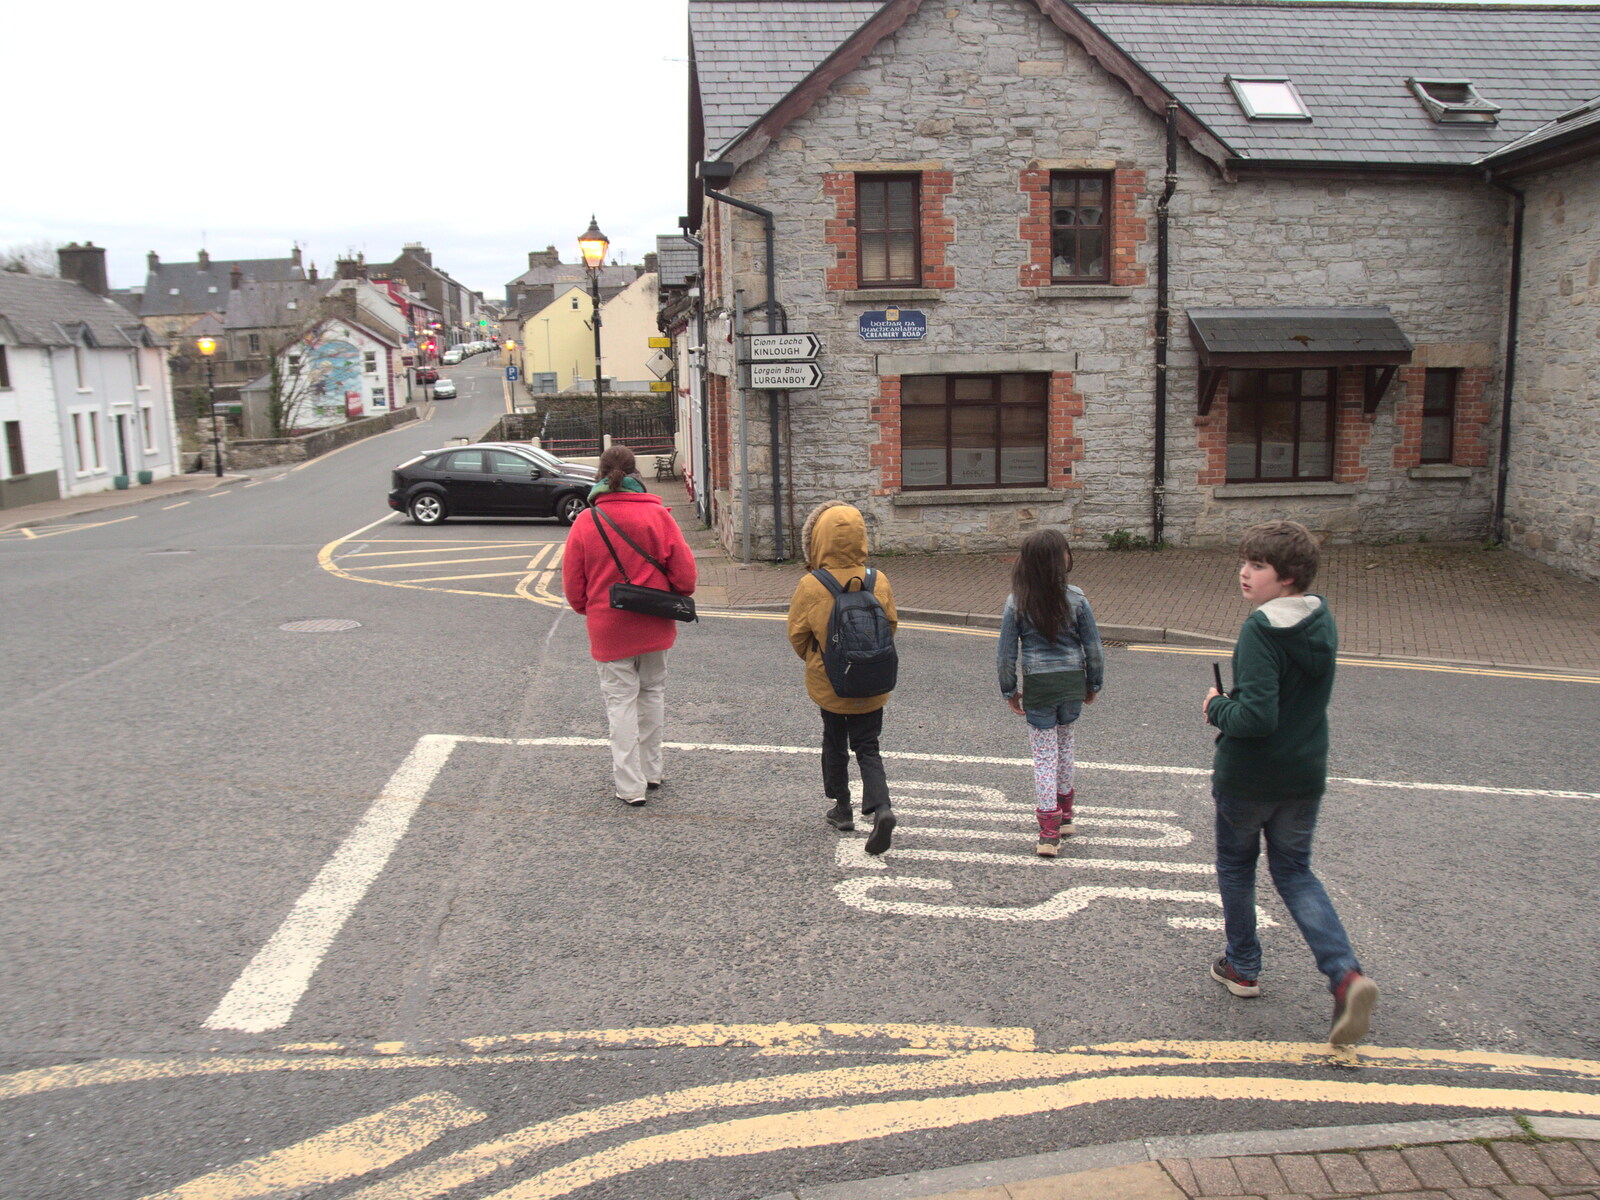 We head out into Manorhamilton from Manorhamilton and Bundoran, Leitrim and Donegal, Ireland - 16th April 2022